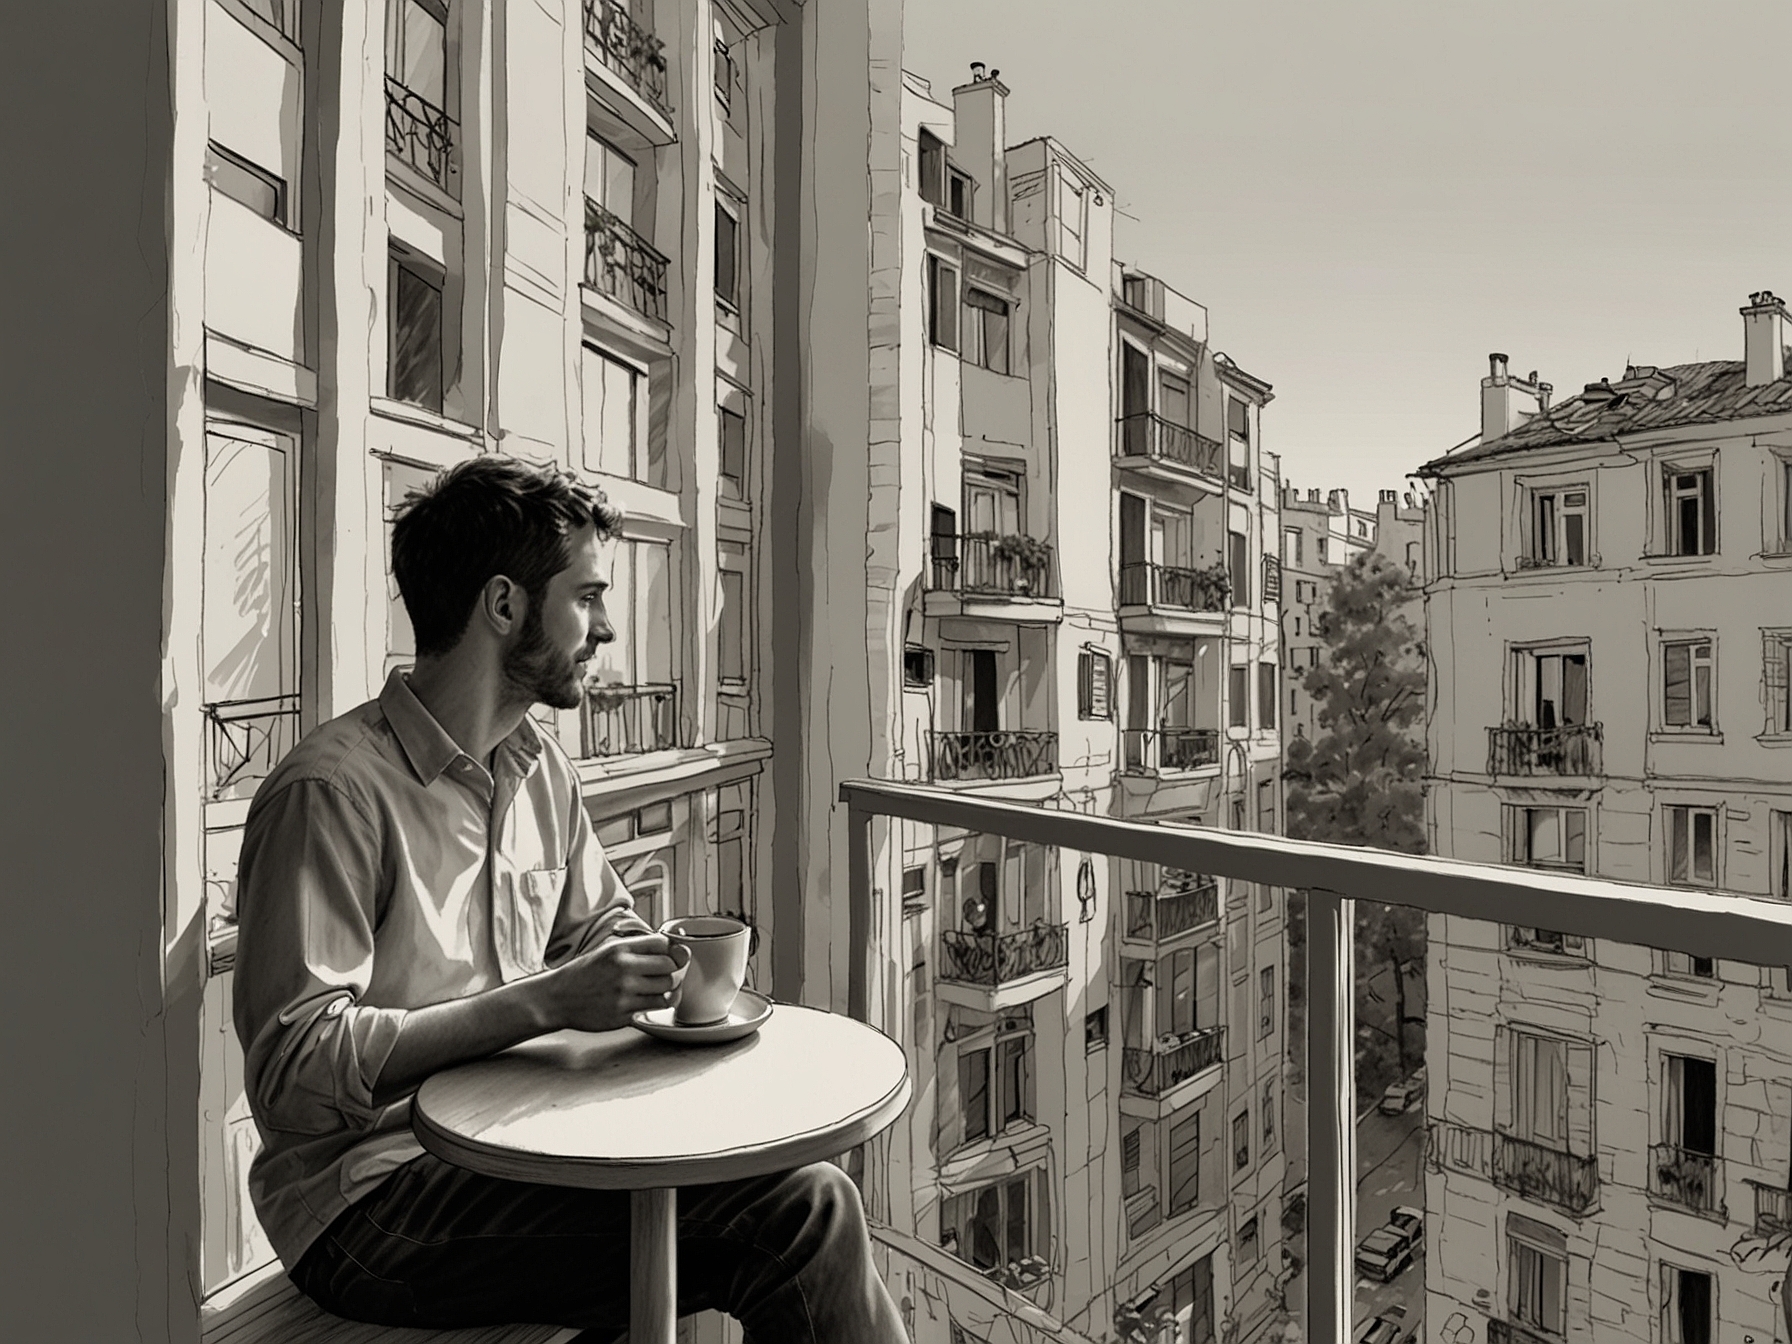 An individual enjoying a cup of coffee while looking out of the window of their apartment, symbolizing the comfort and familiarity of long-term residency.